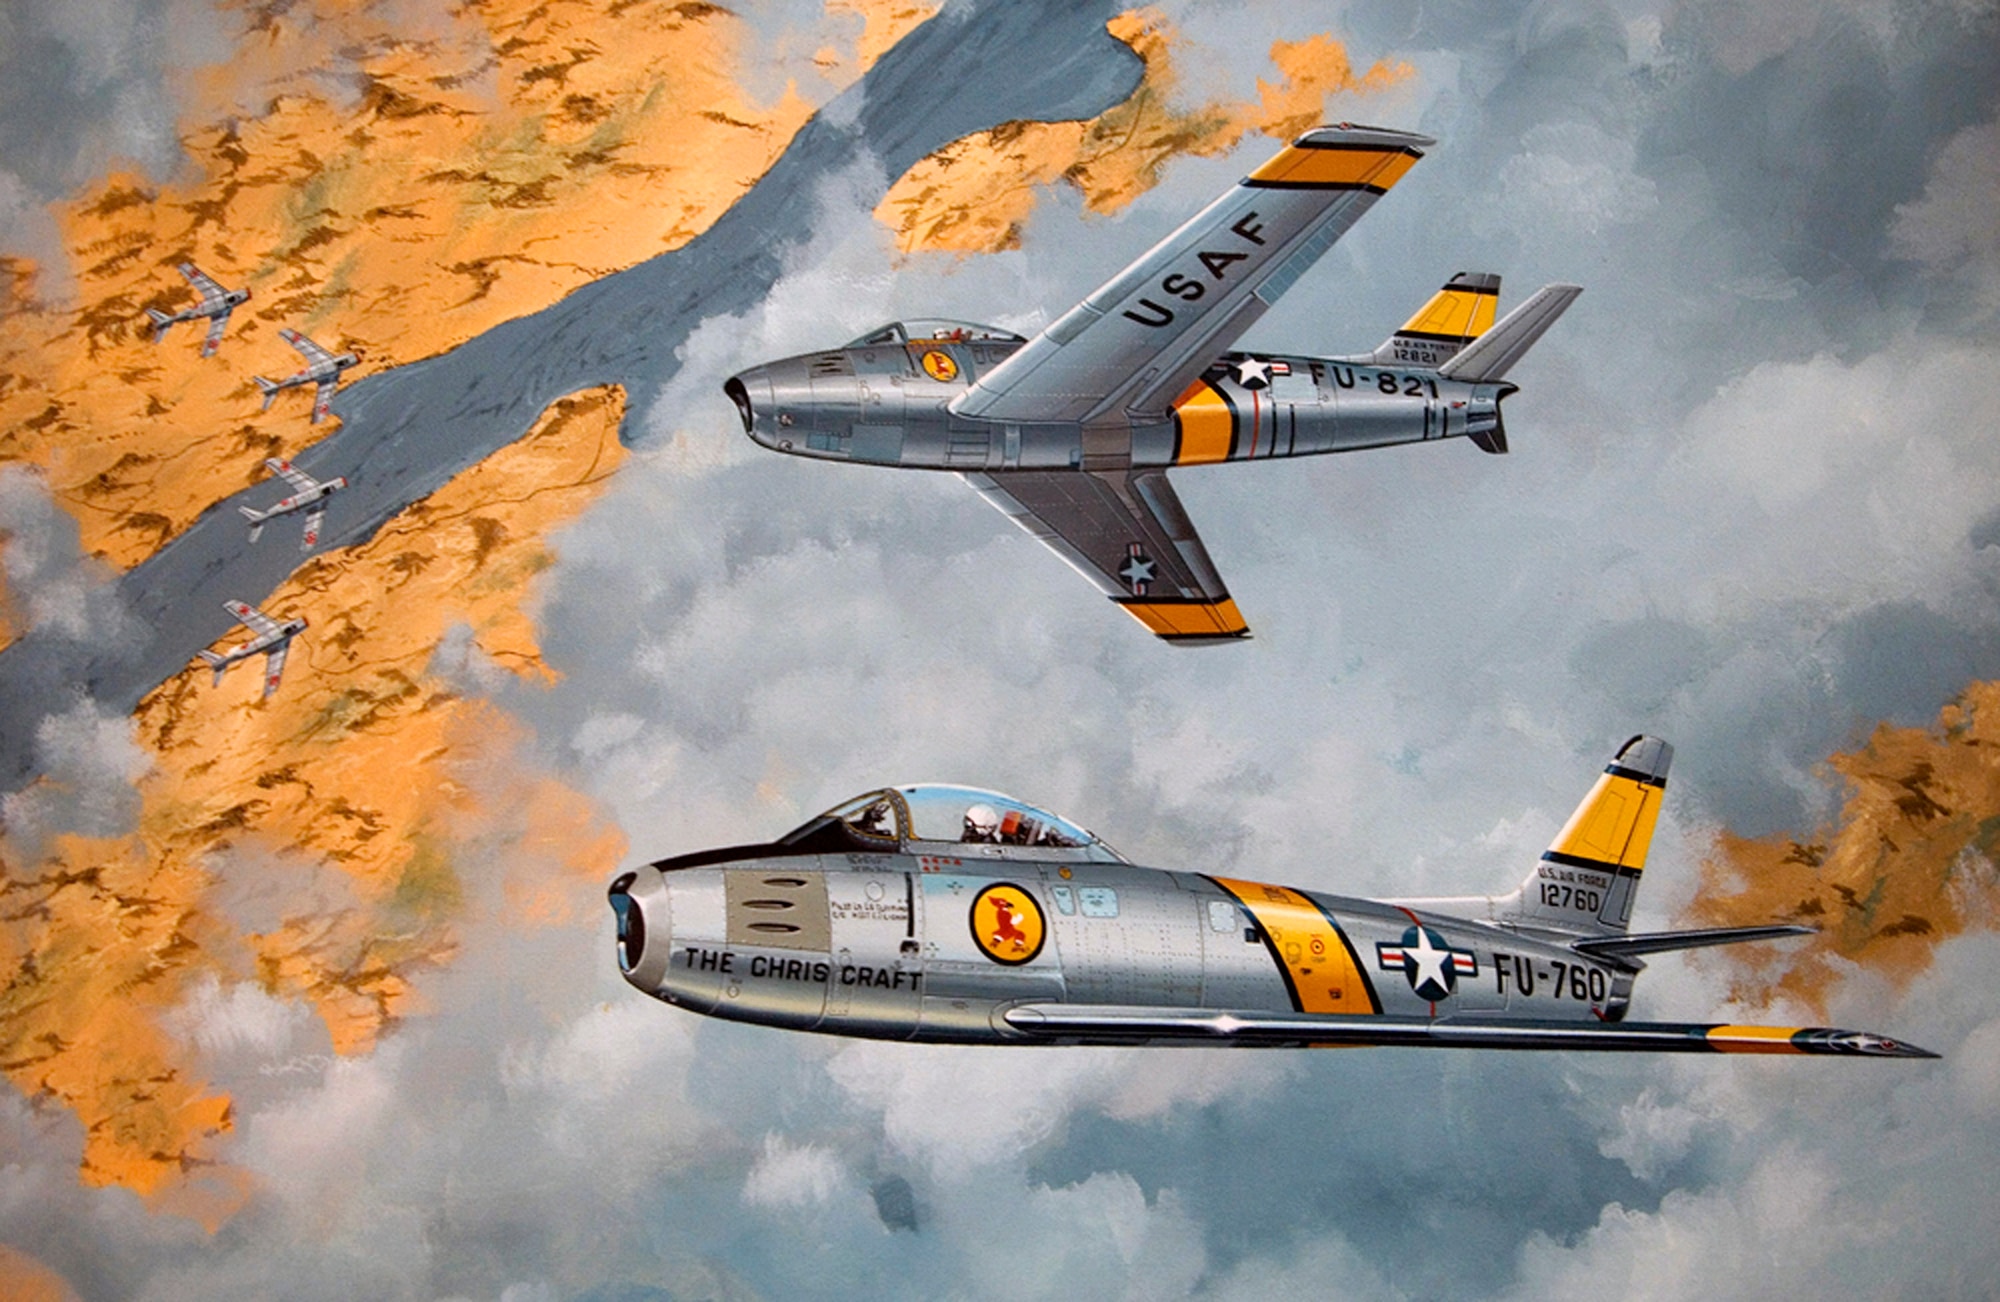 A painting of the "Chris Craft" F-86A flown by retired Lt. Gen. Charles G. Cleveland hangs in his office. The "Chris Craft" named after General Cleveland's son, was the aircraft he used to shoot down five MiG-15s during the Korean War. General Cleveland was deployed to South Korea in March 1952, where he flew F-86s as a flight commander with the 4th Fighter Interceptor Wing at Kimpo Air Base. (U.S. Air Force photo/Staff Sgt. Bennie J. Davis III)
